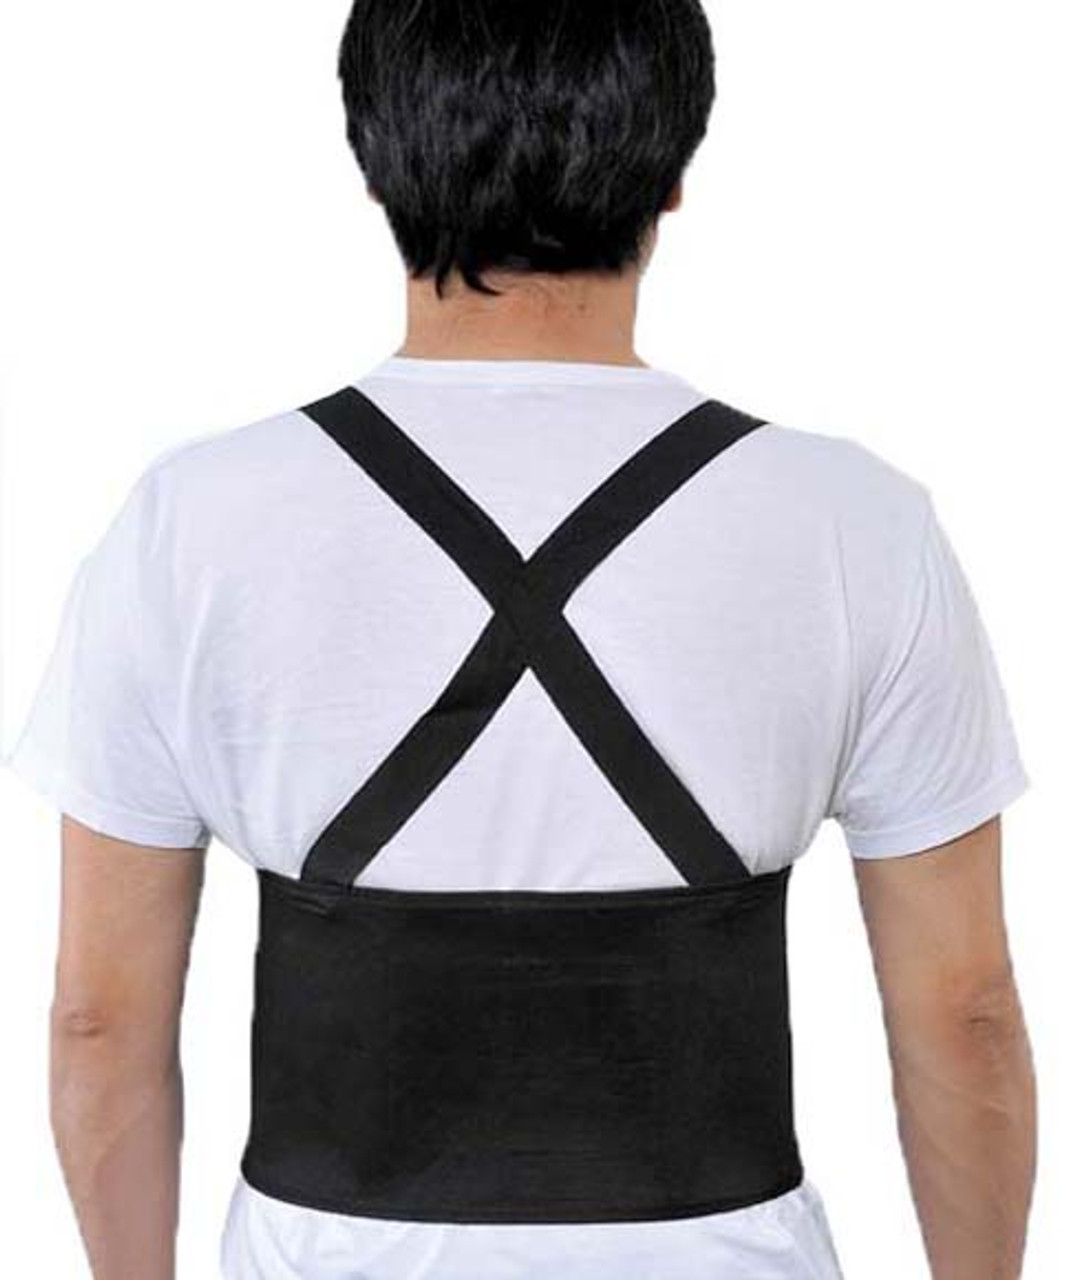 Back Support Belt With Attached Suspender